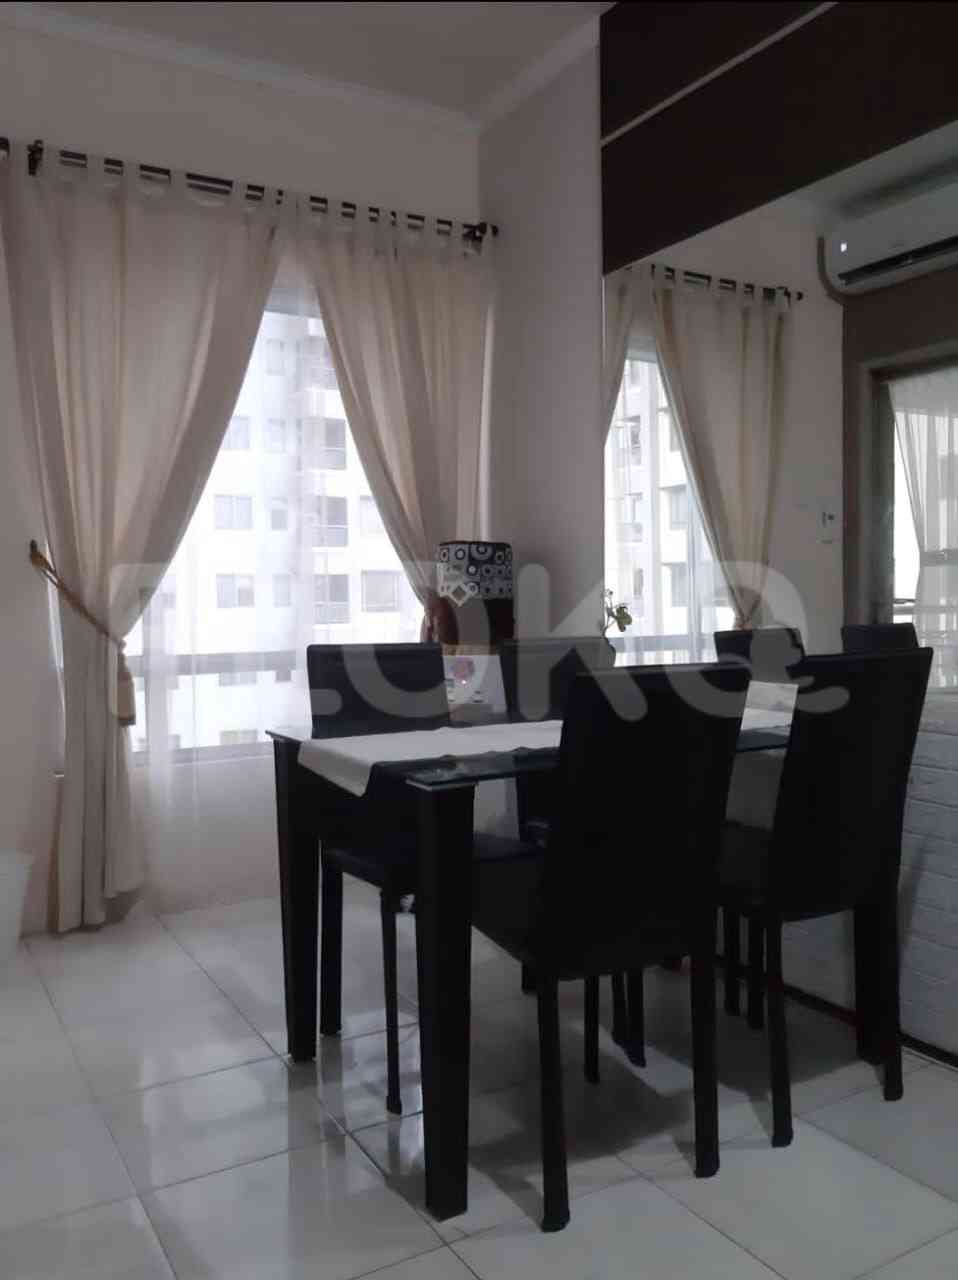 2 Bedroom on 16th Floor for Rent in Sudirman Park Apartment - ftac9f 5